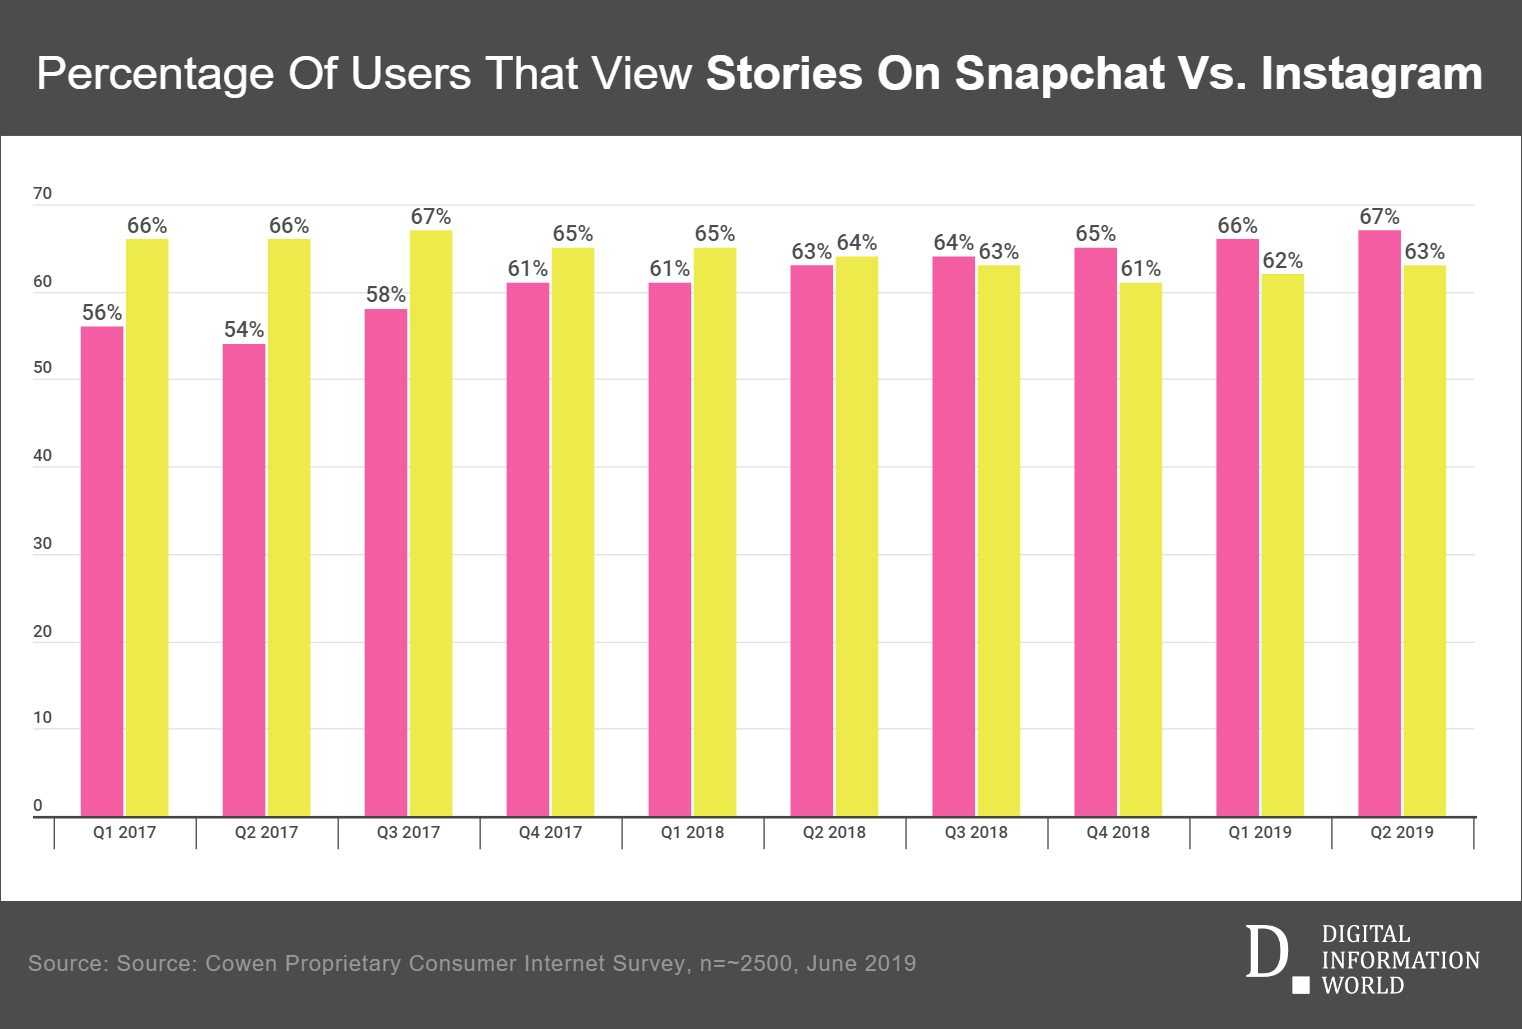 Snapchat still has one key advantage over Instagram i.e. one to one private messaging, but that could soon change